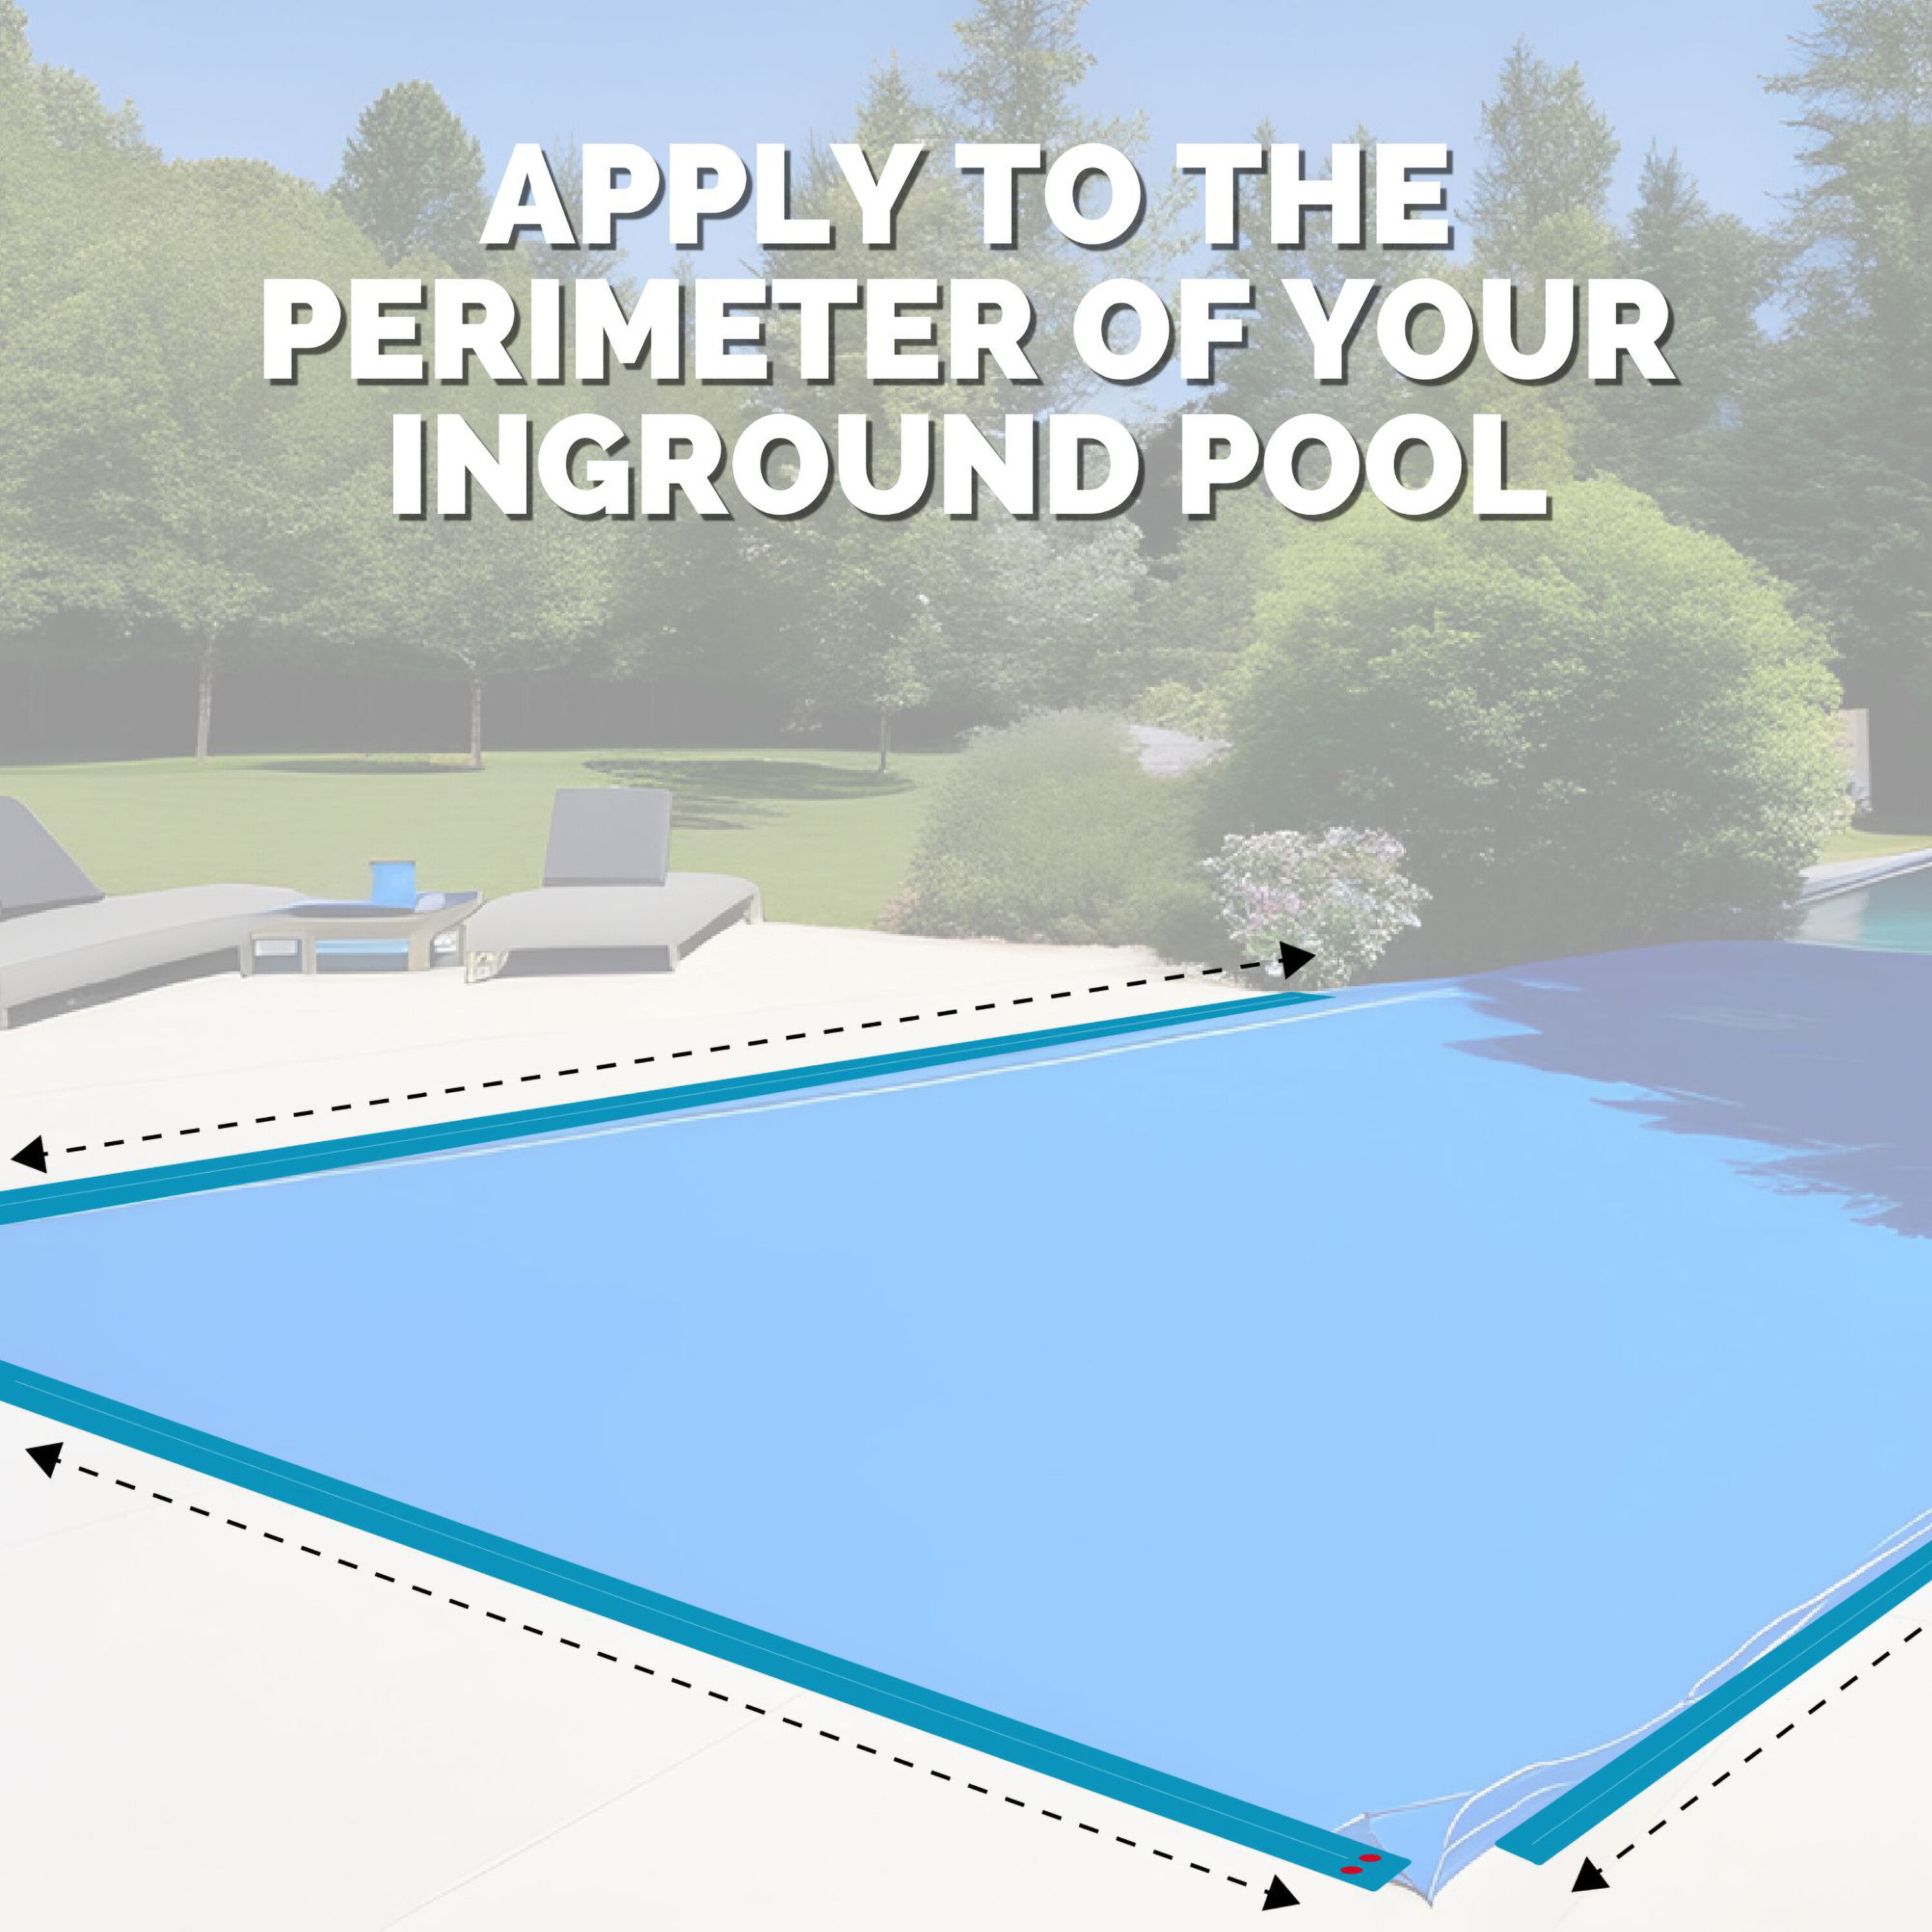 Pool Winterizing Accessories at